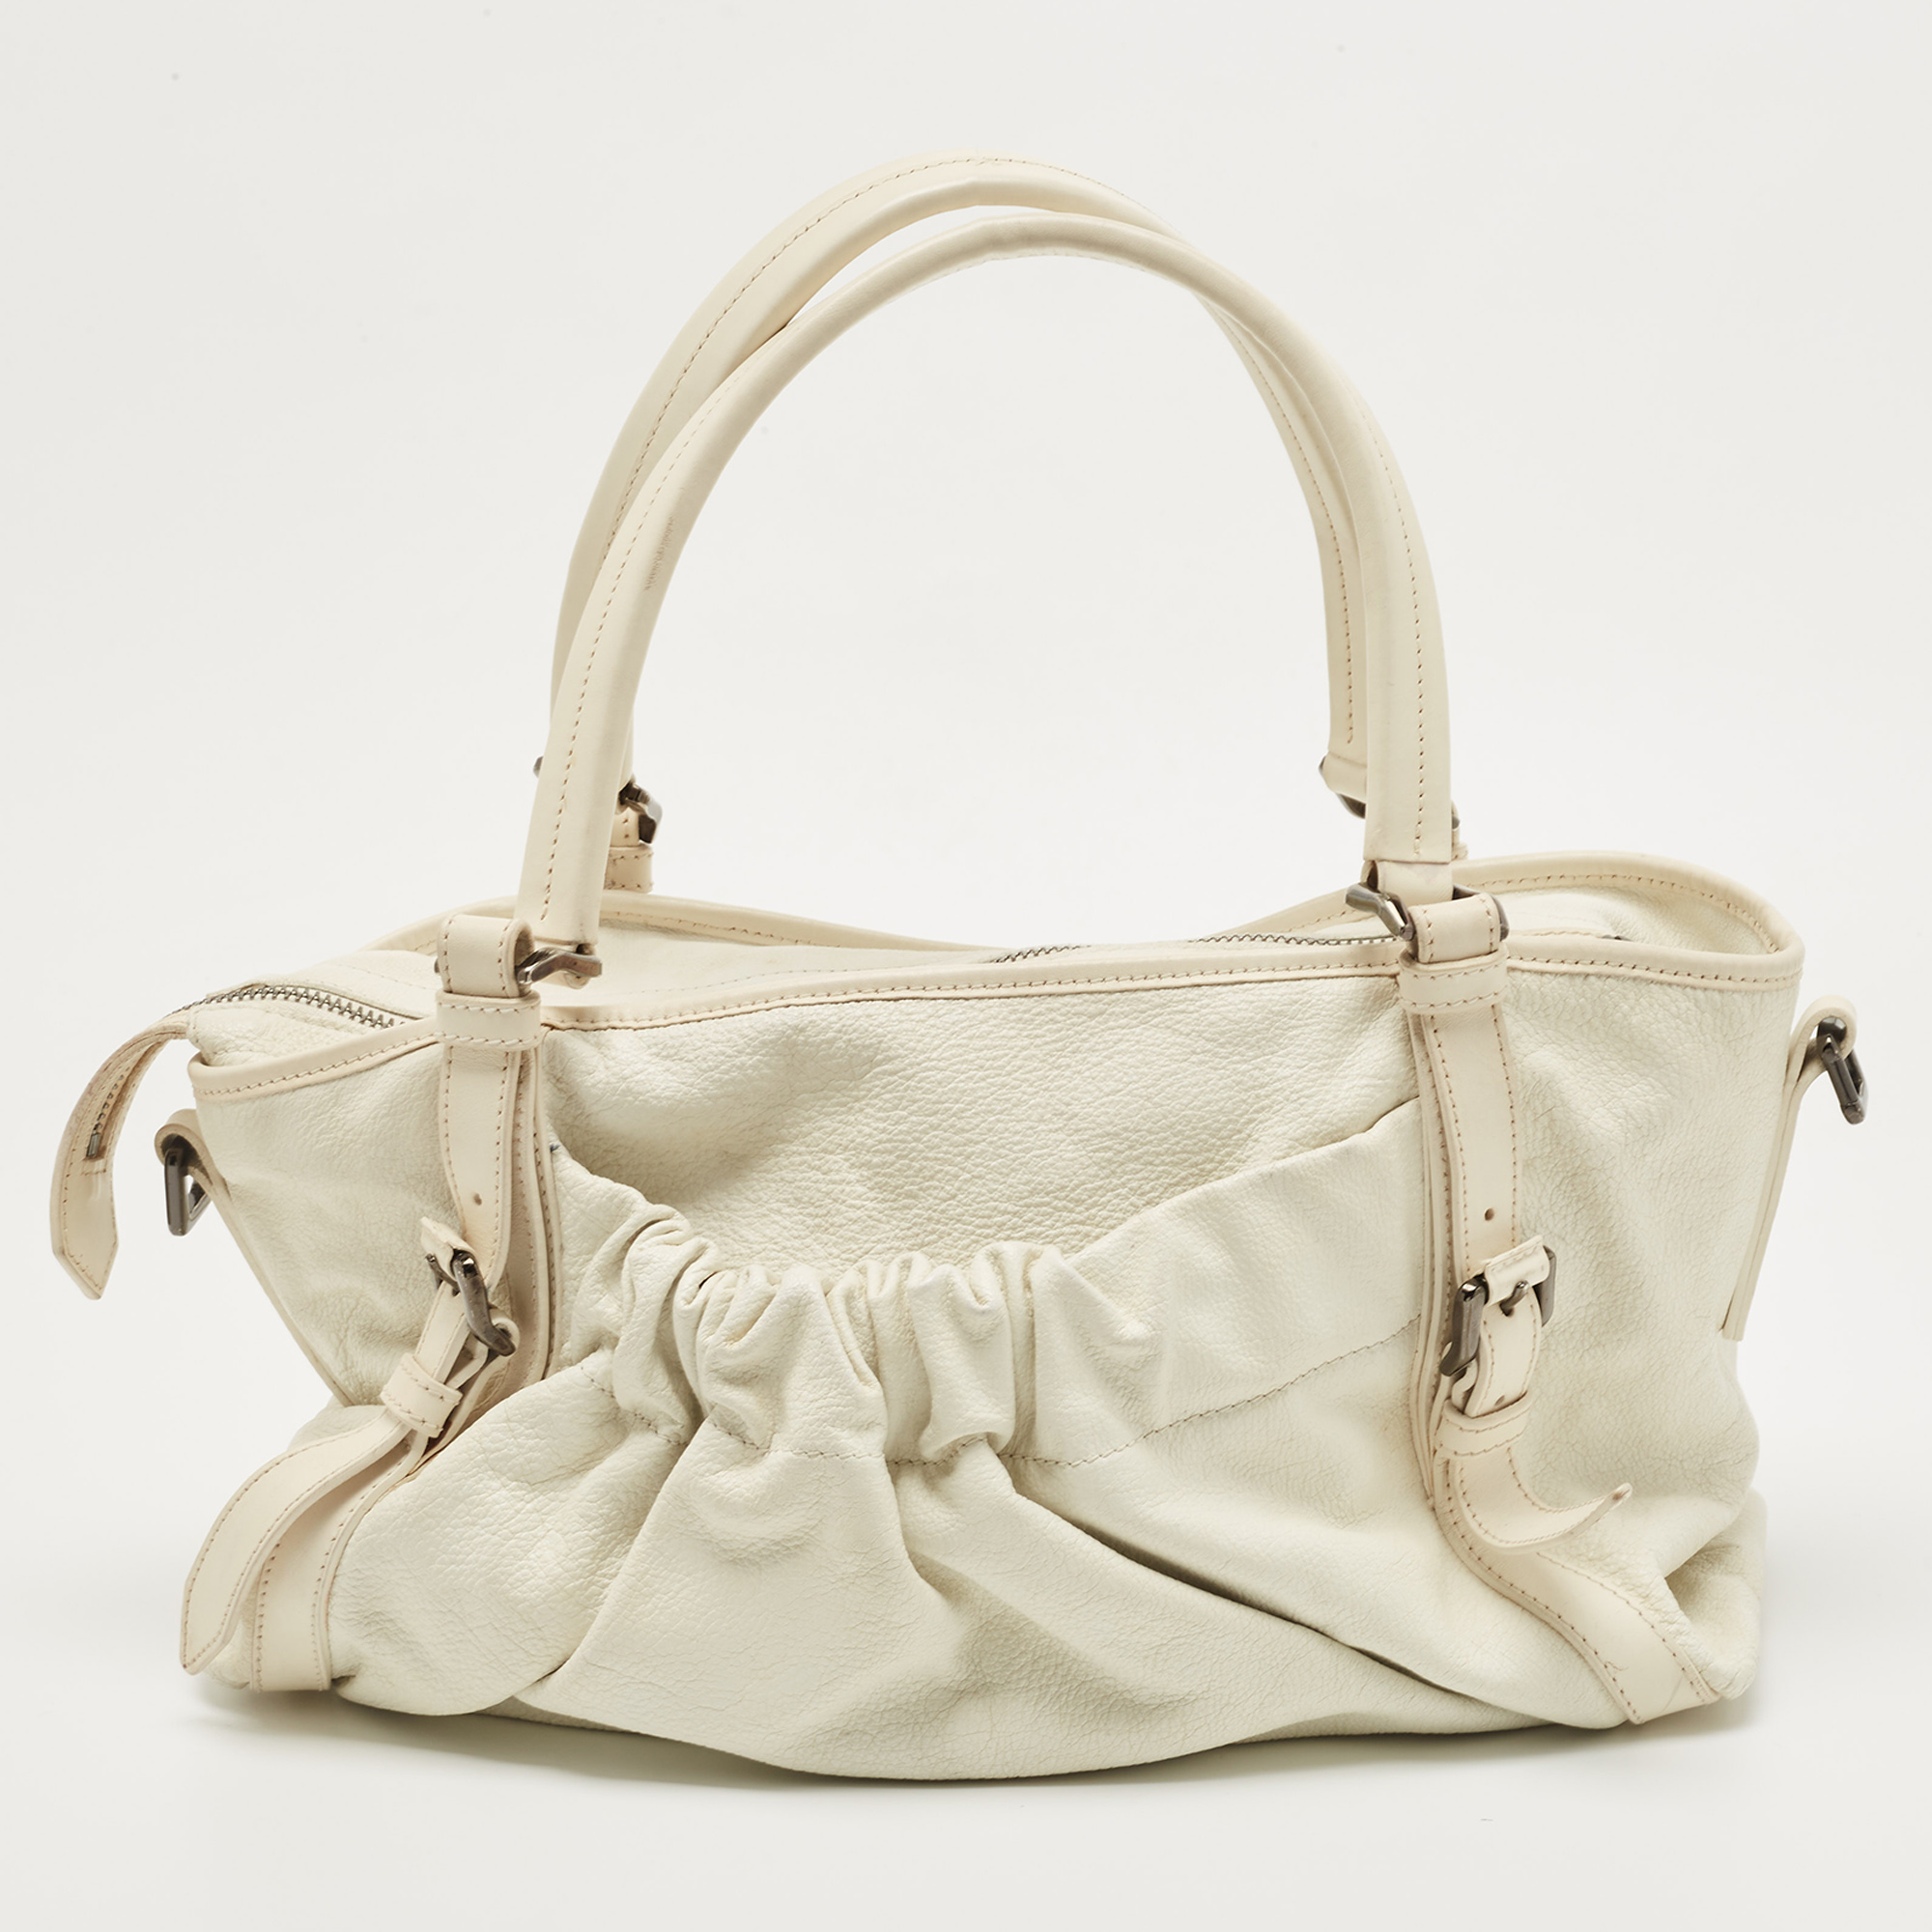 Burberry Off White Leather Drawstring Tote